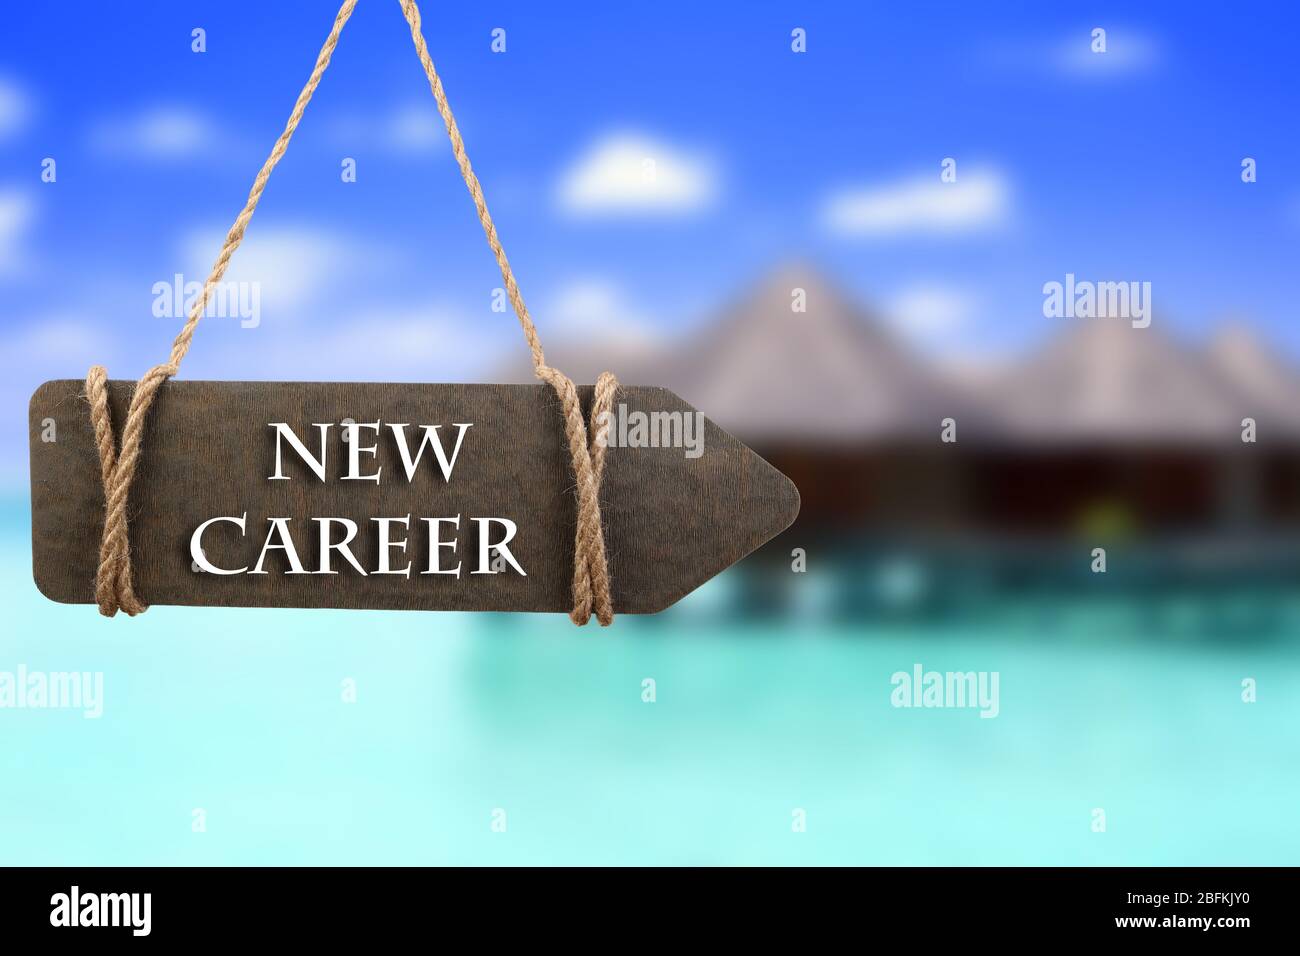 Dream job concept. Wooden sign arrow on nature background Stock Photo